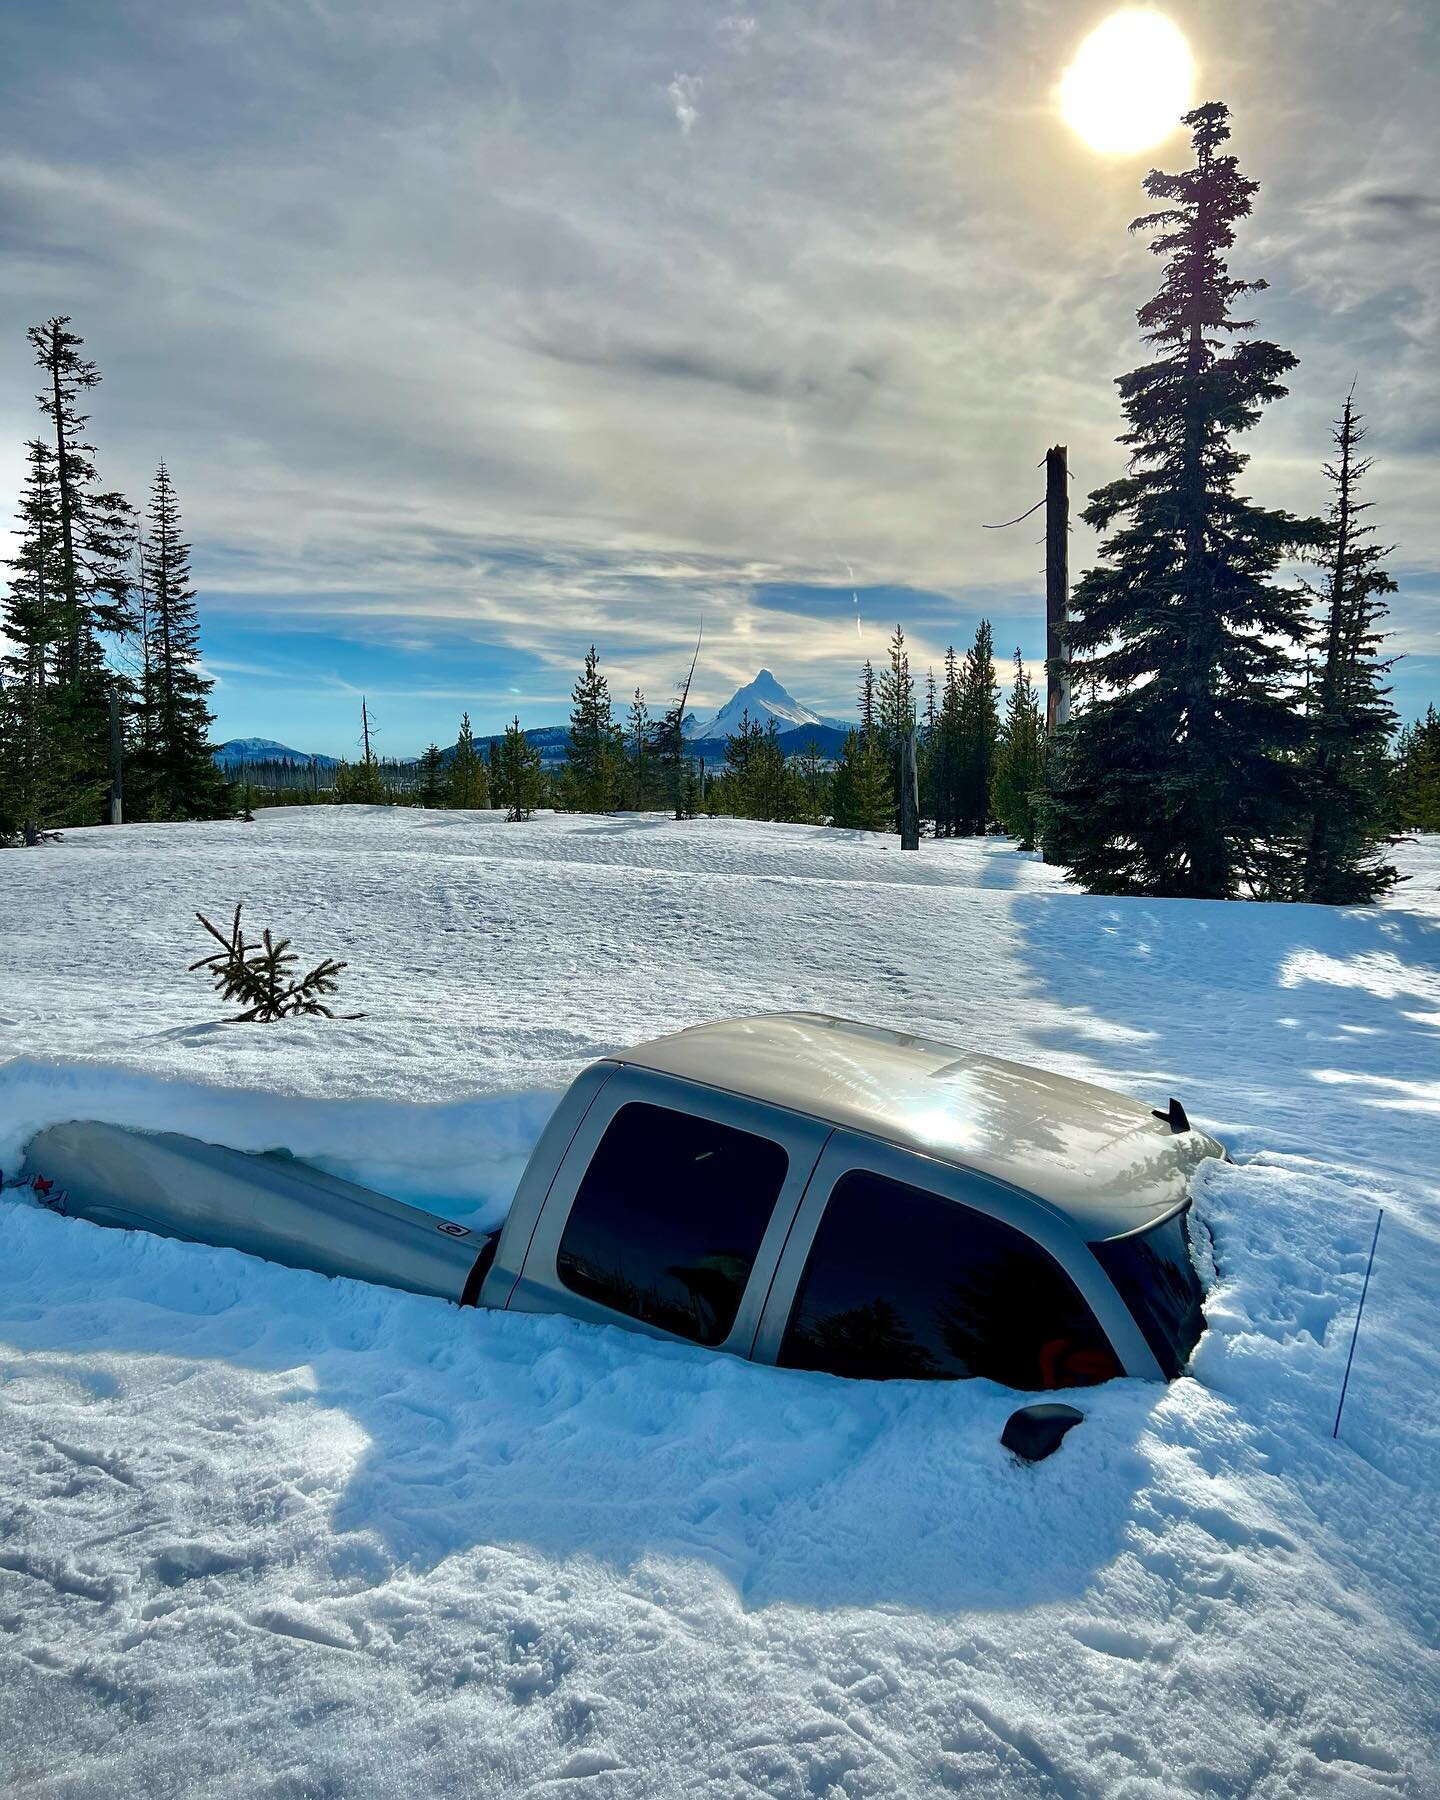 Happy Hump Day Y&rsquo;all! Hope your week is going better than this! 

Found this unfortunate truck while Snowshoeing near the Santiam Pass PCT trailhead. Guessing it got stuck on a Christmas tree hunt just before the big snowstorms hit. Looks like 